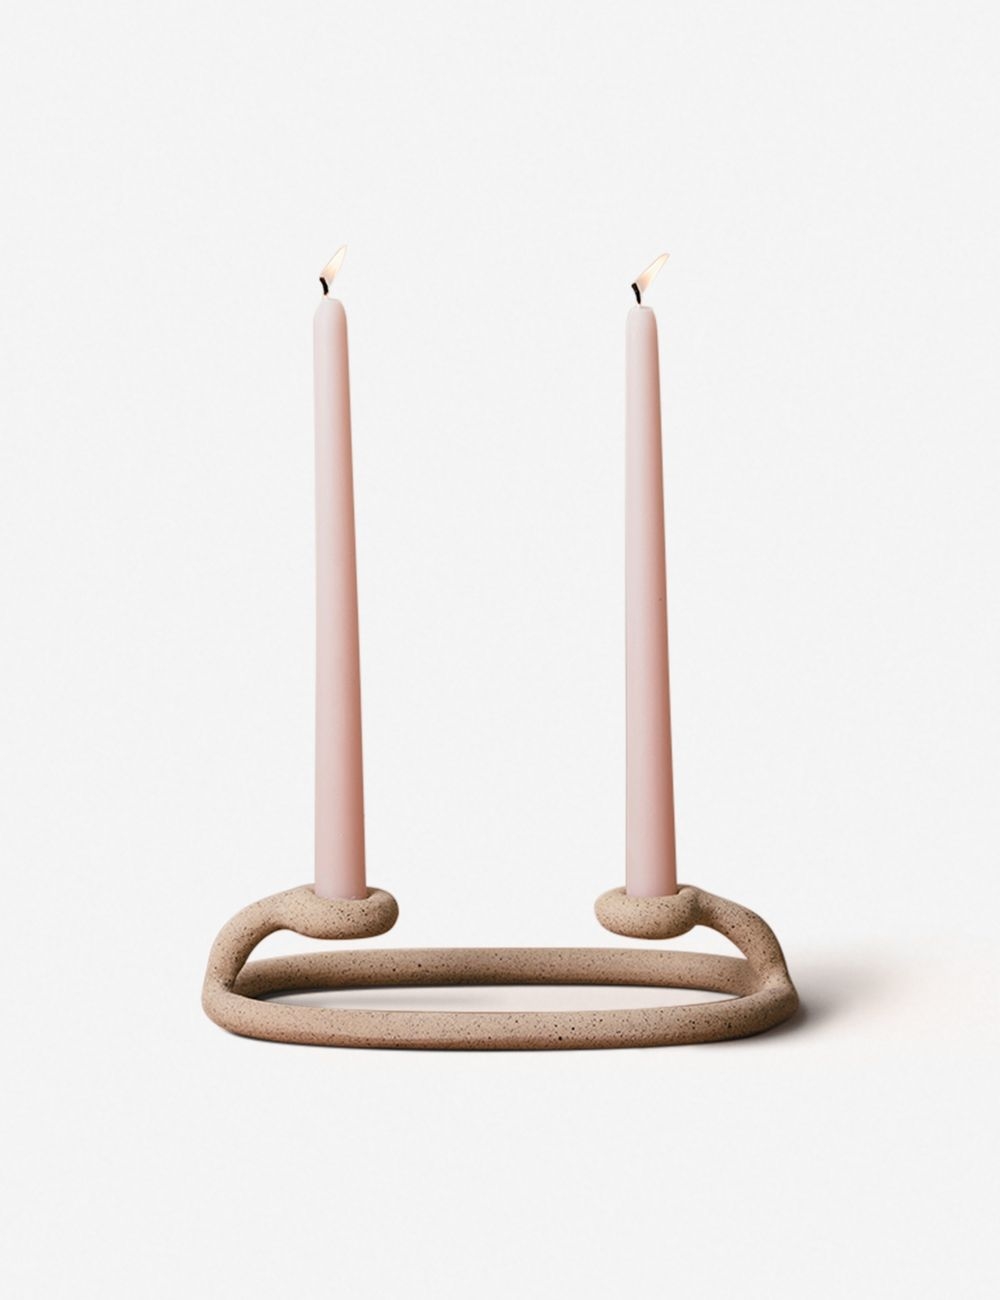 Duo Candlestick by SIN - Image 0